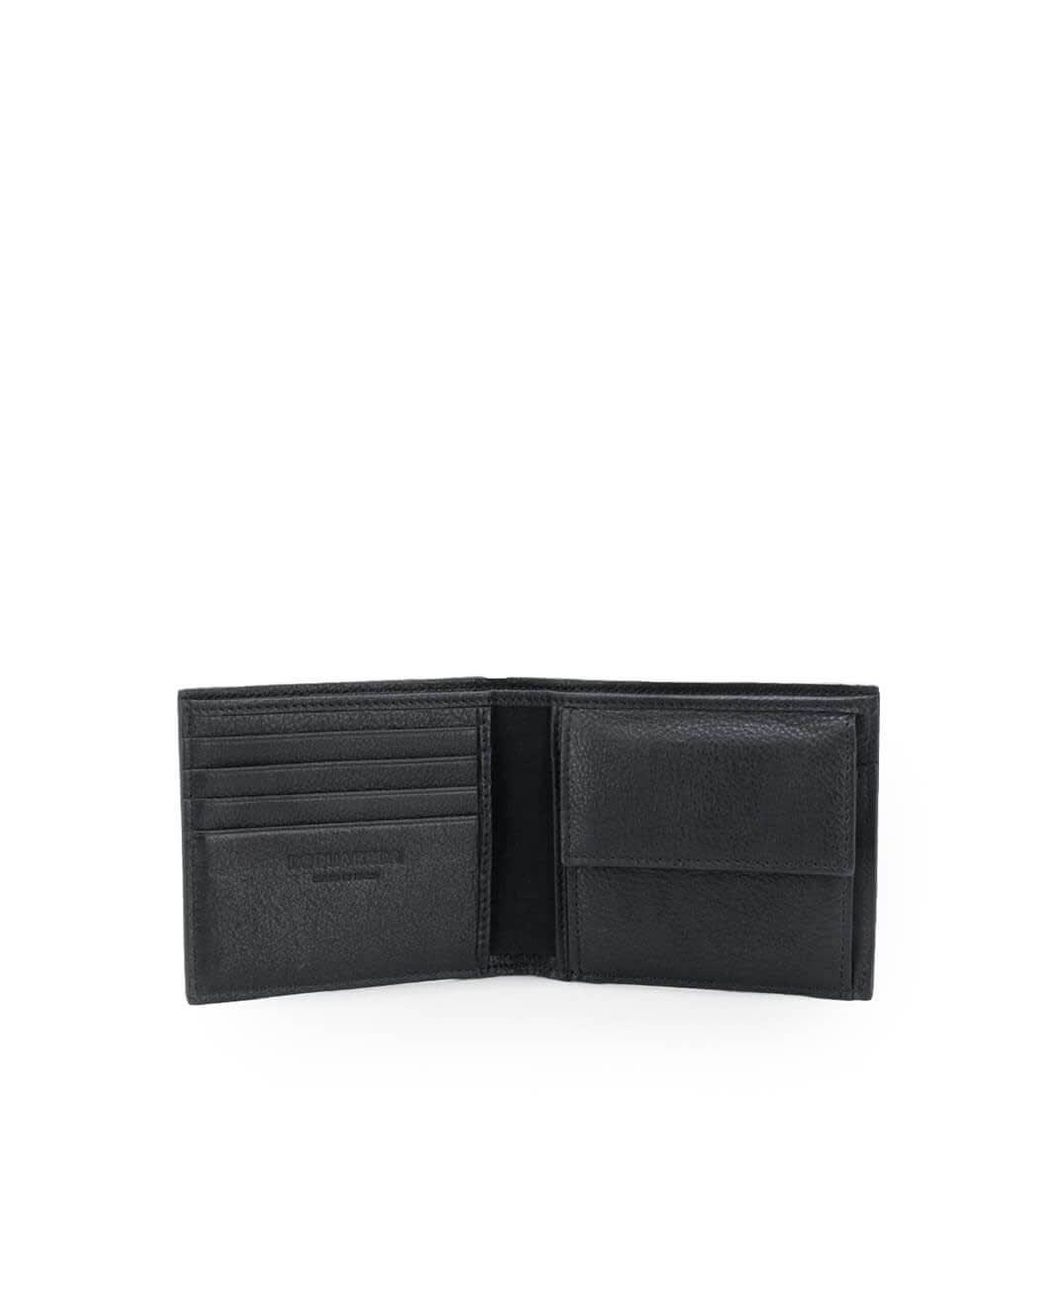 DSquared² Leather Black Wallet With White Logo for Men - Lyst